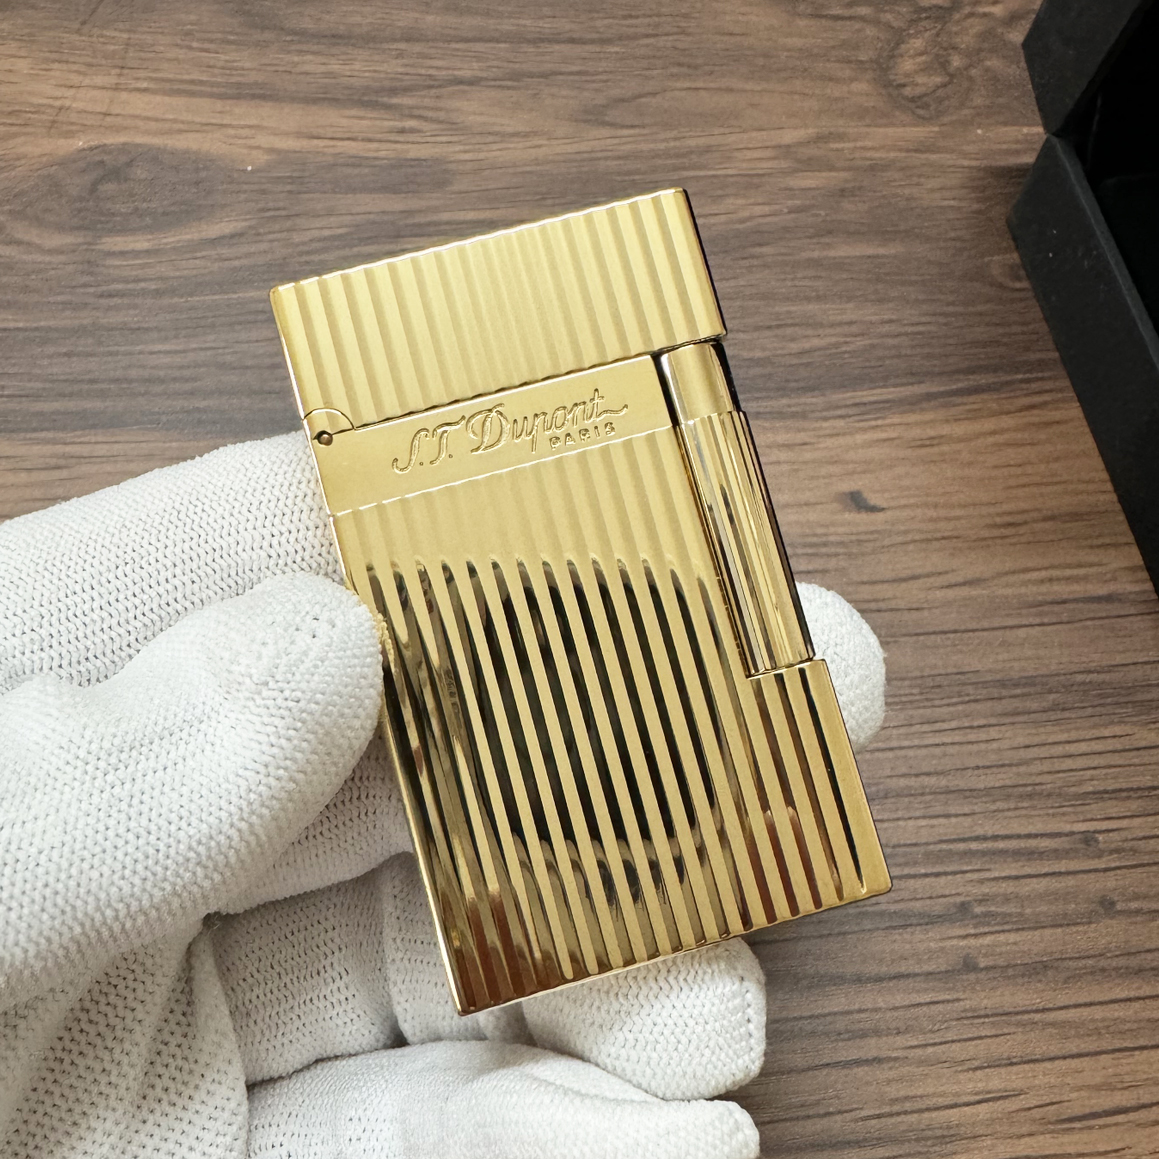 S.T. Dupont Ligne 2 Yellow Gold Vertical Lines Lighter 016827